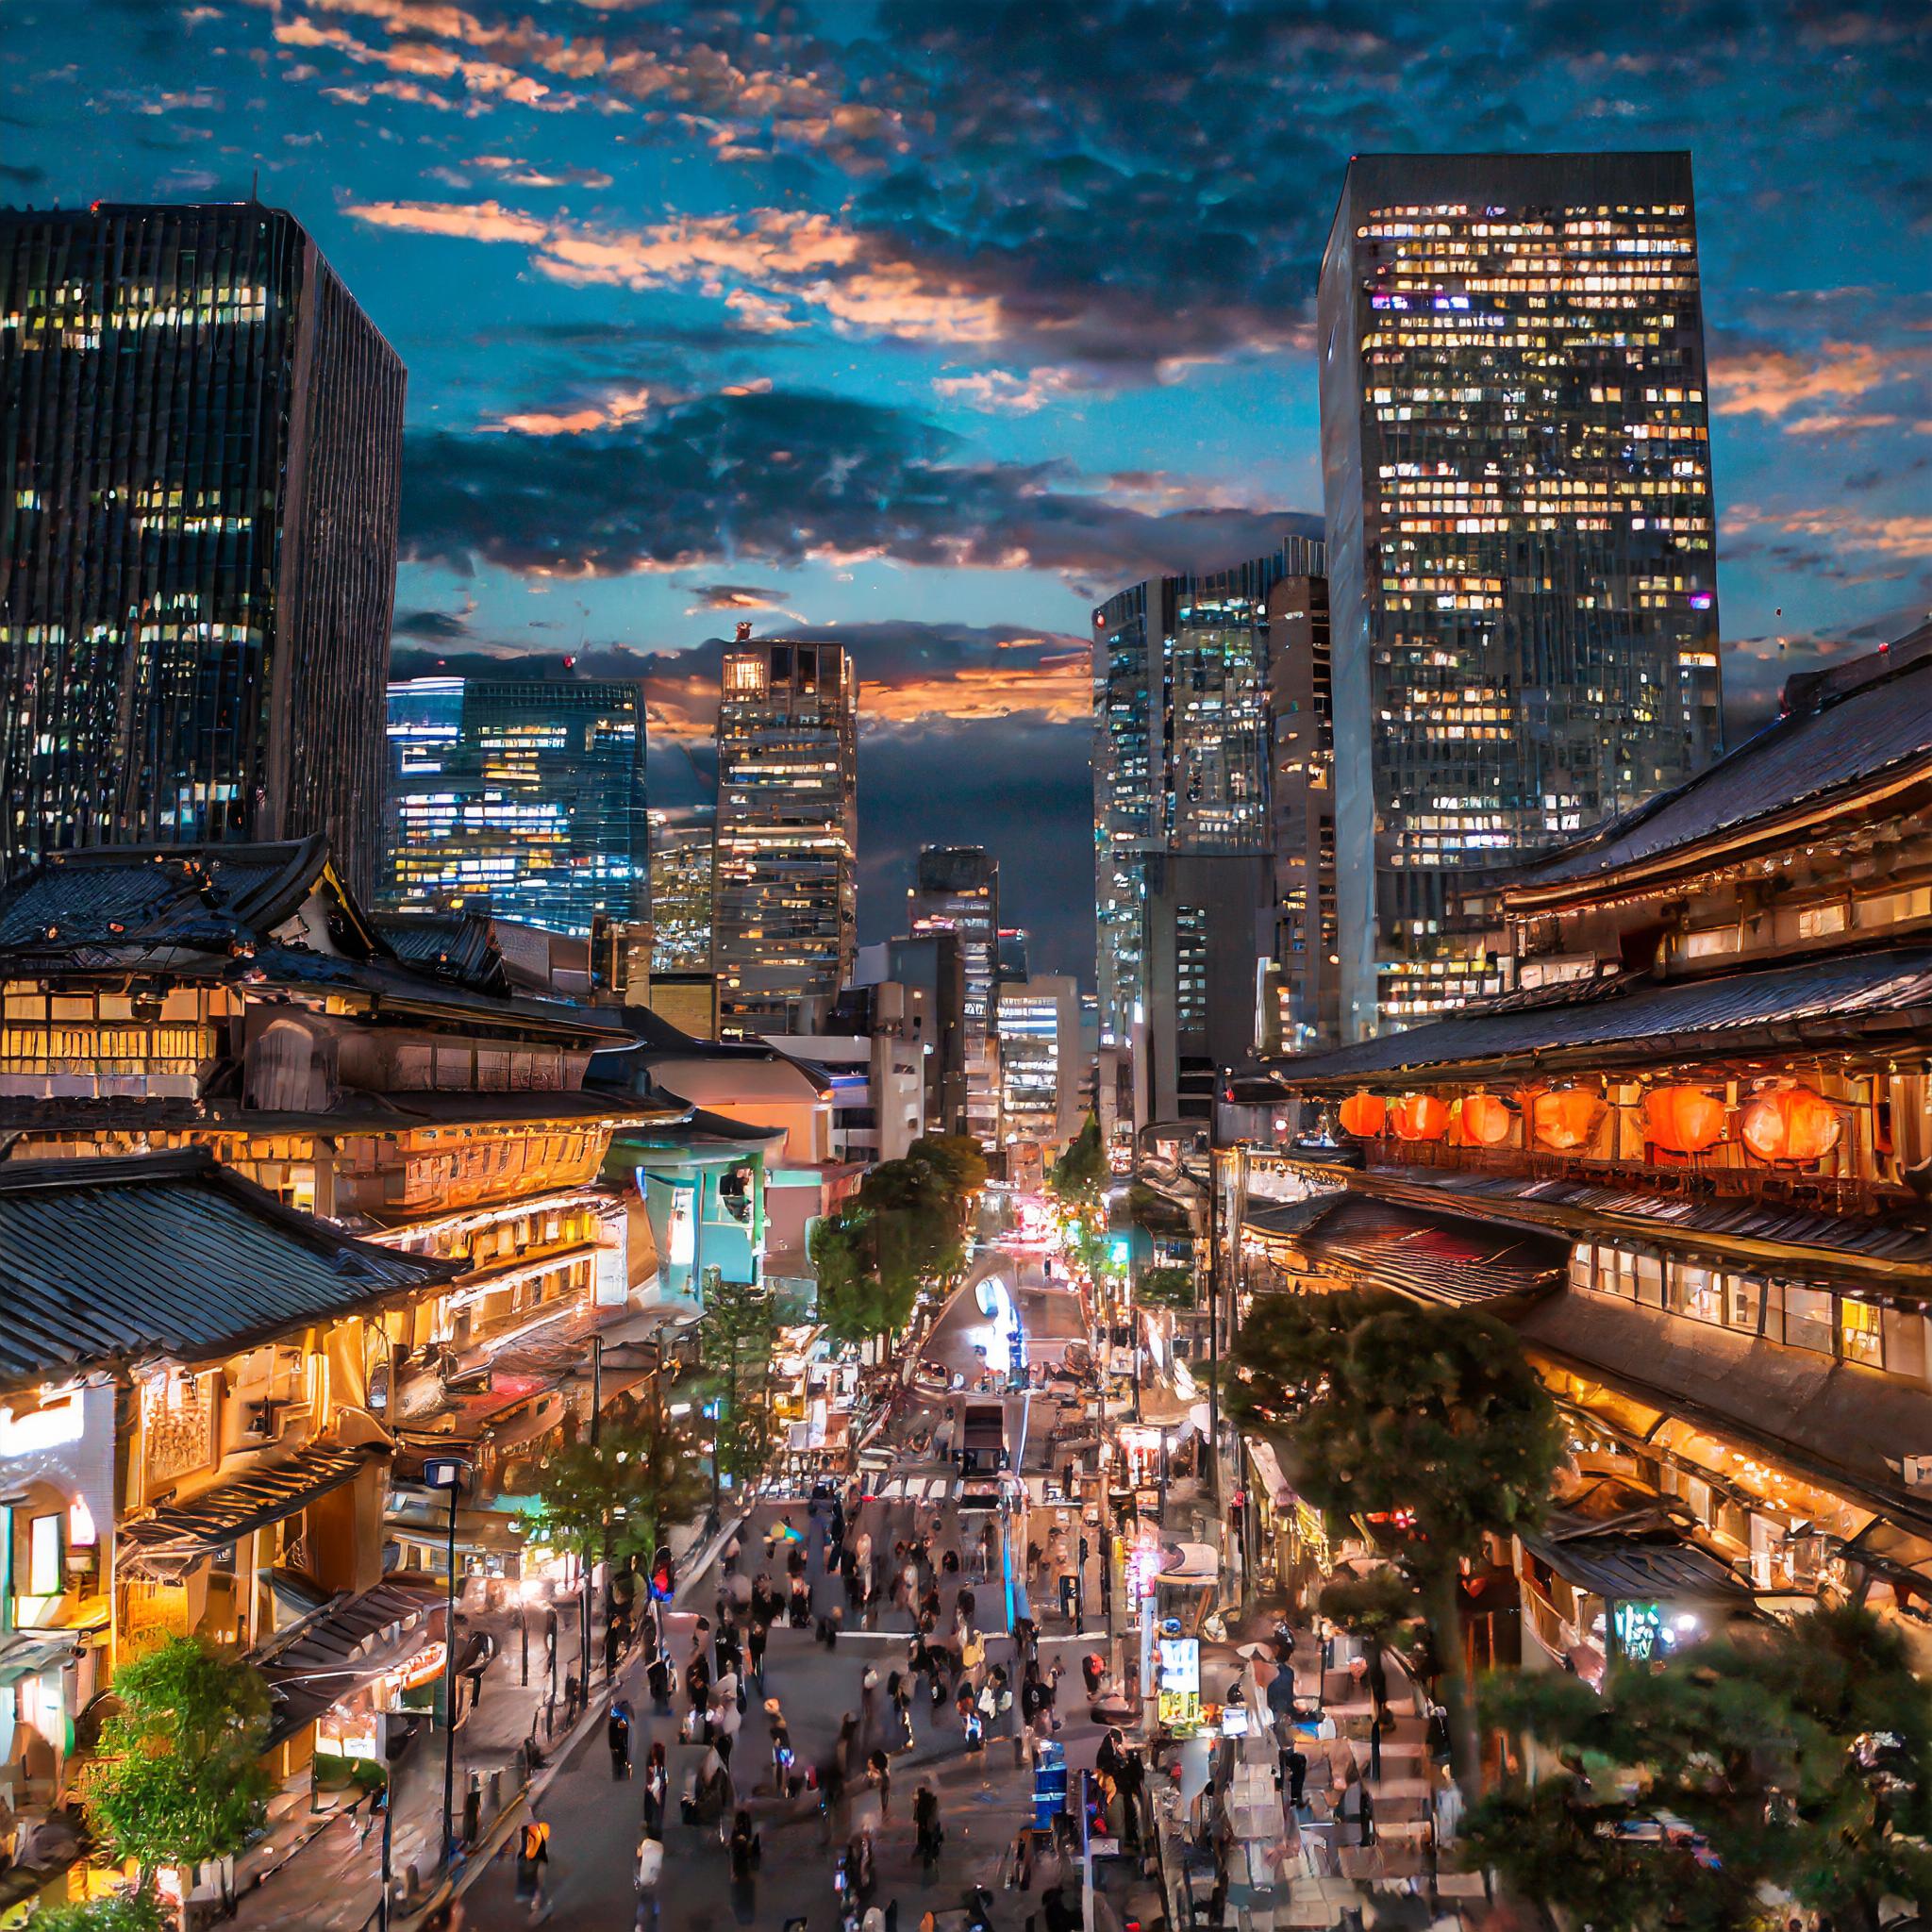  Firefly Tokyo Japan streets, at night with restaurants and nice scenery of the sky 35293.jpg